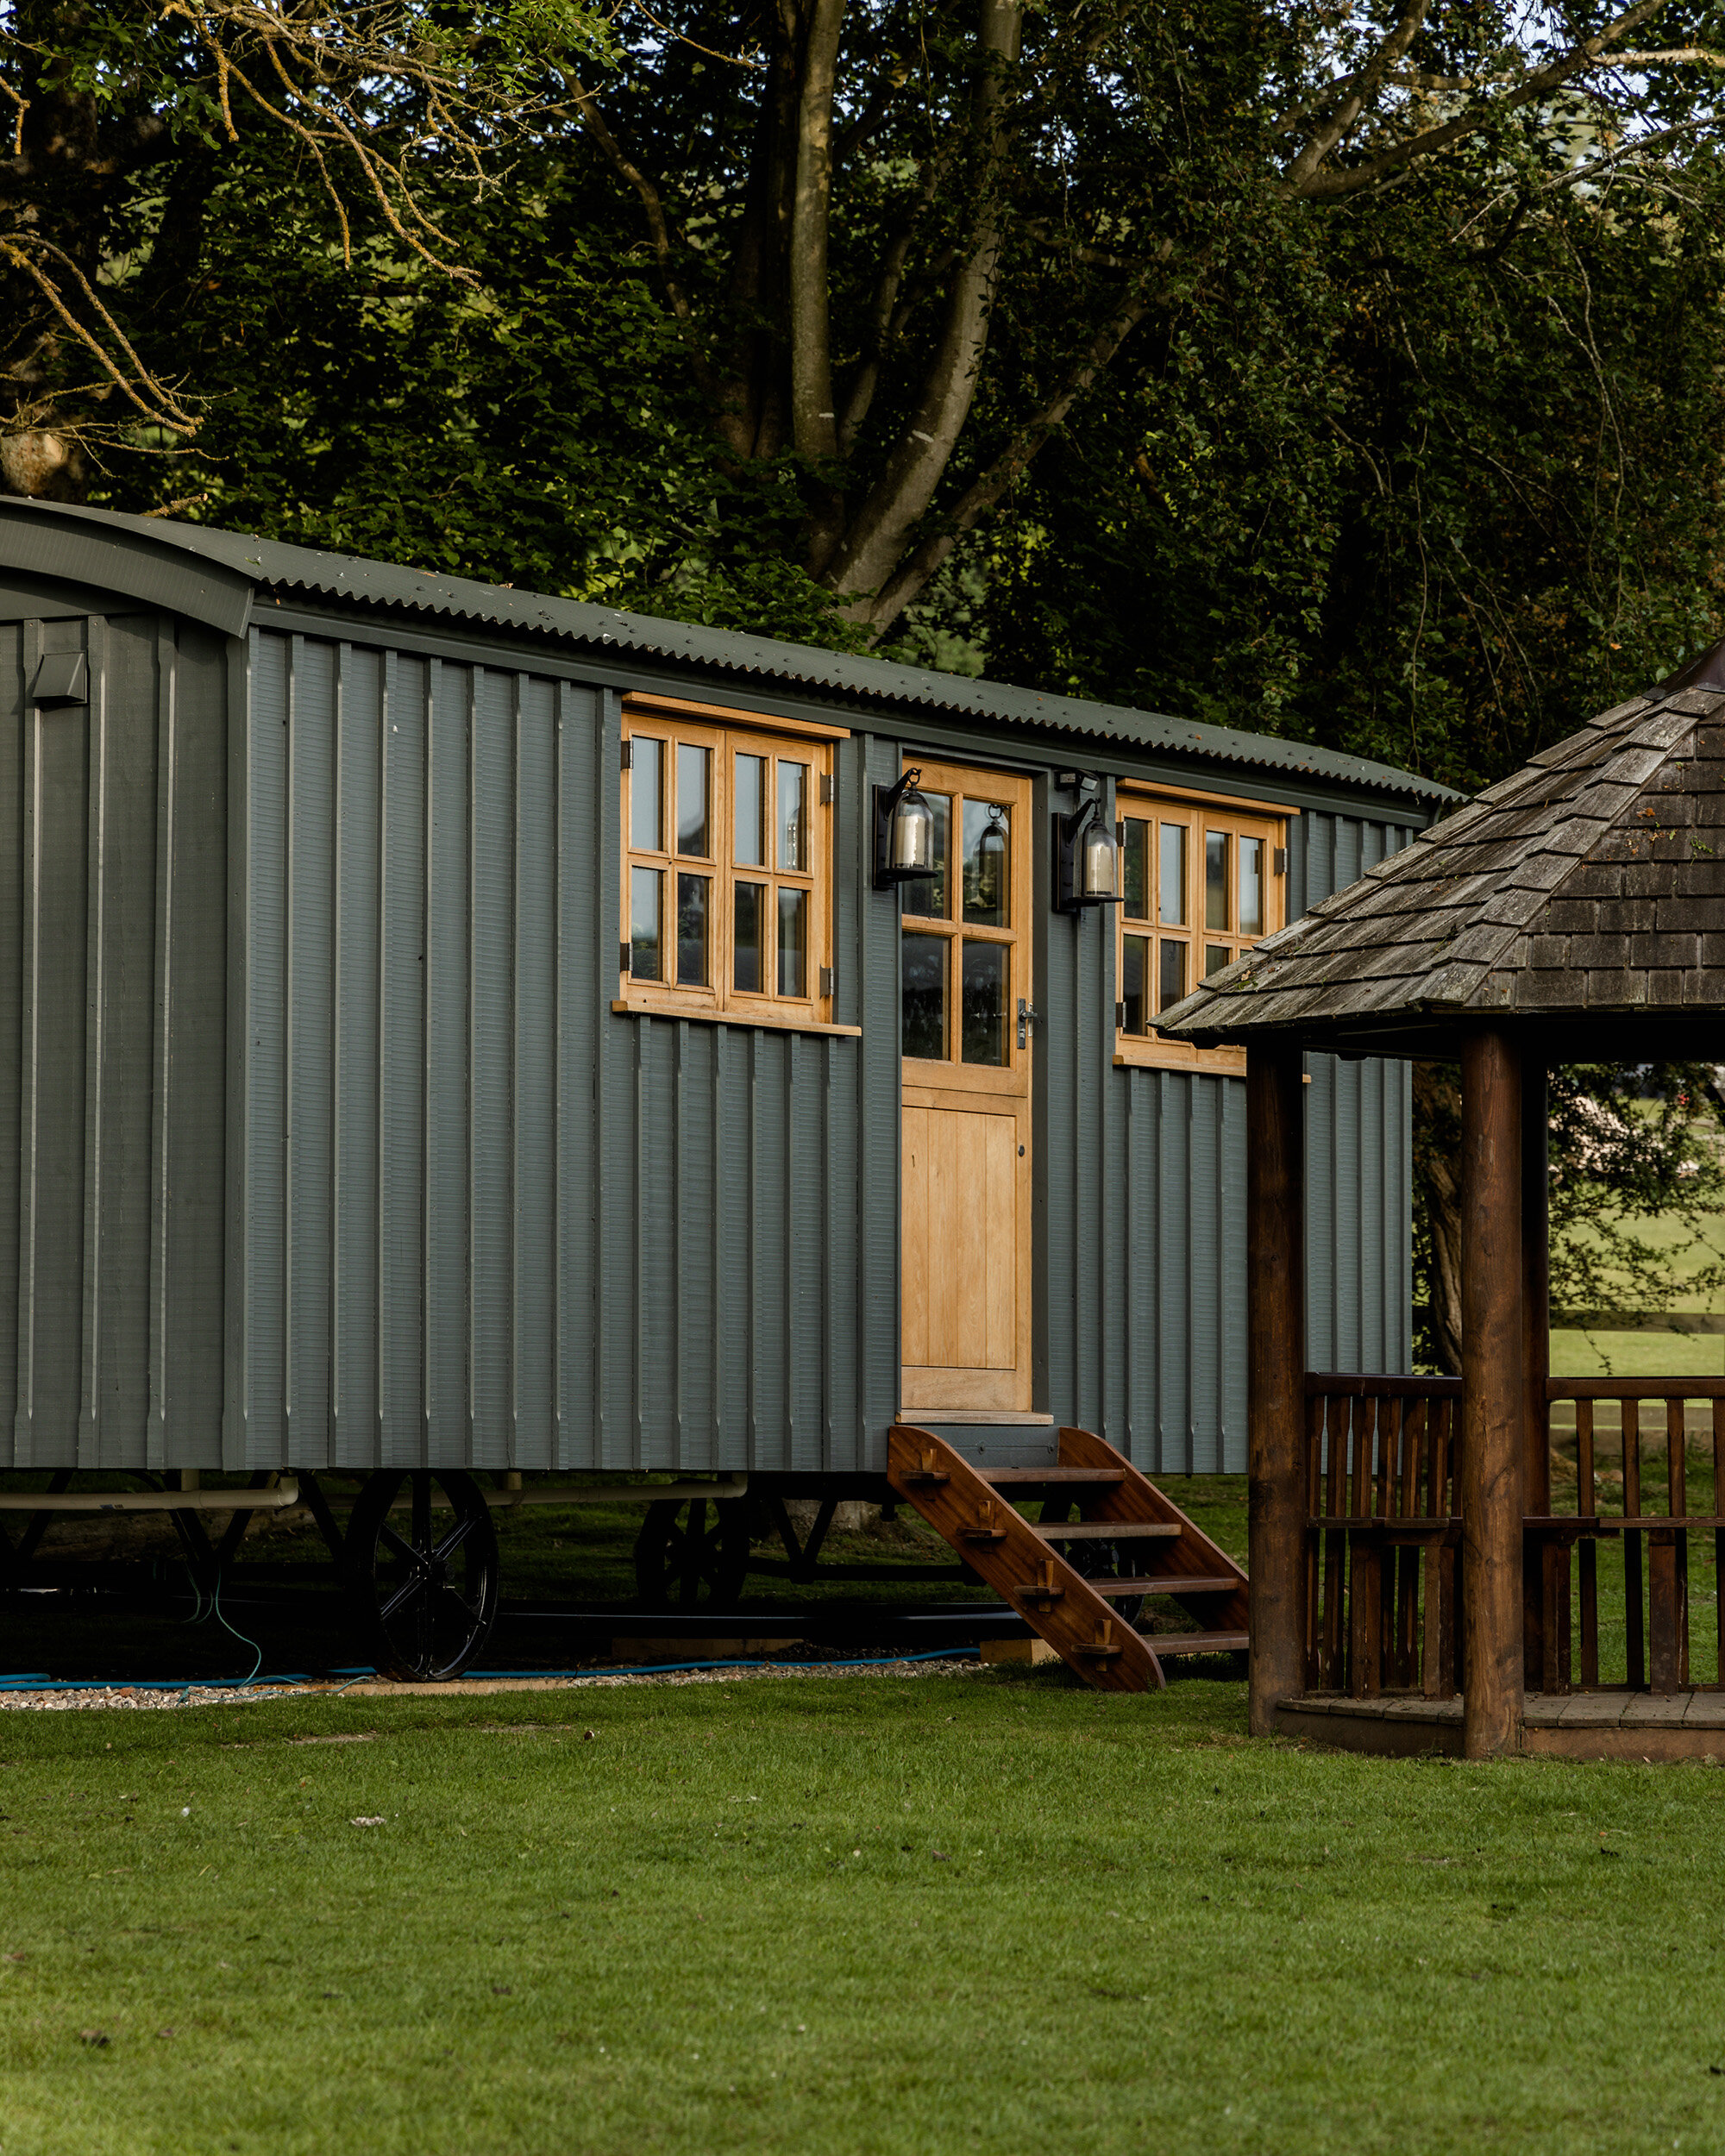 Shepherds Huts in Oxfordshire